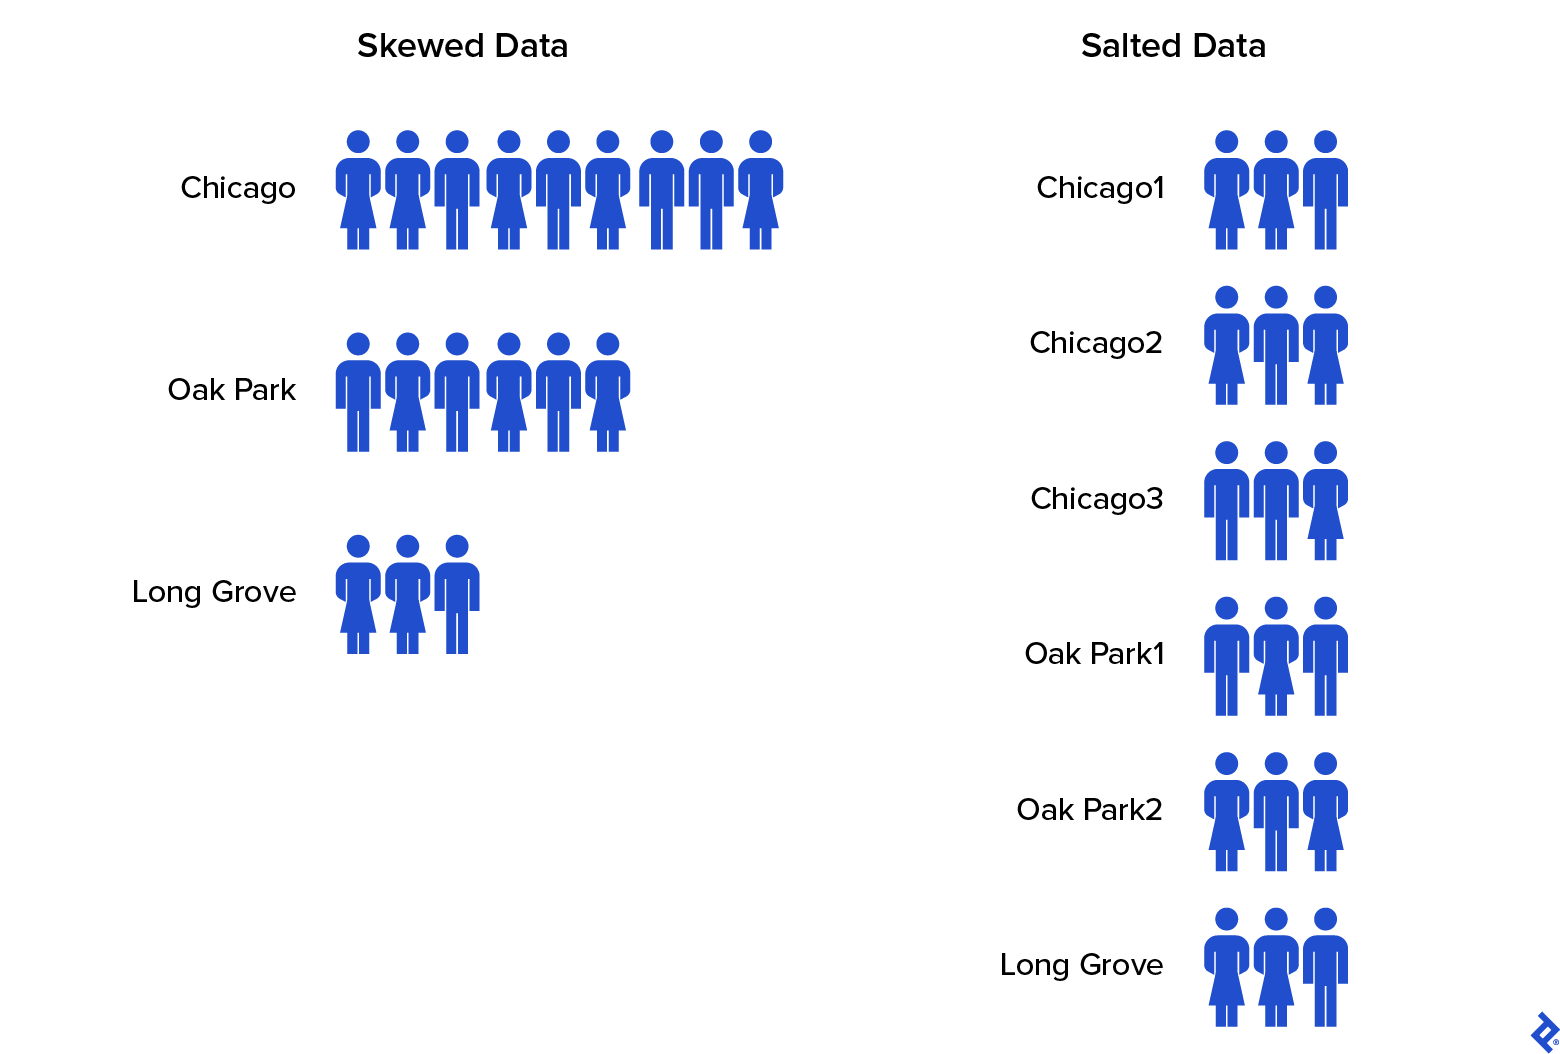 Skewed data on the left, with uneven data for three cities, and salted data on the right, with evenly distributed data and six city groups.